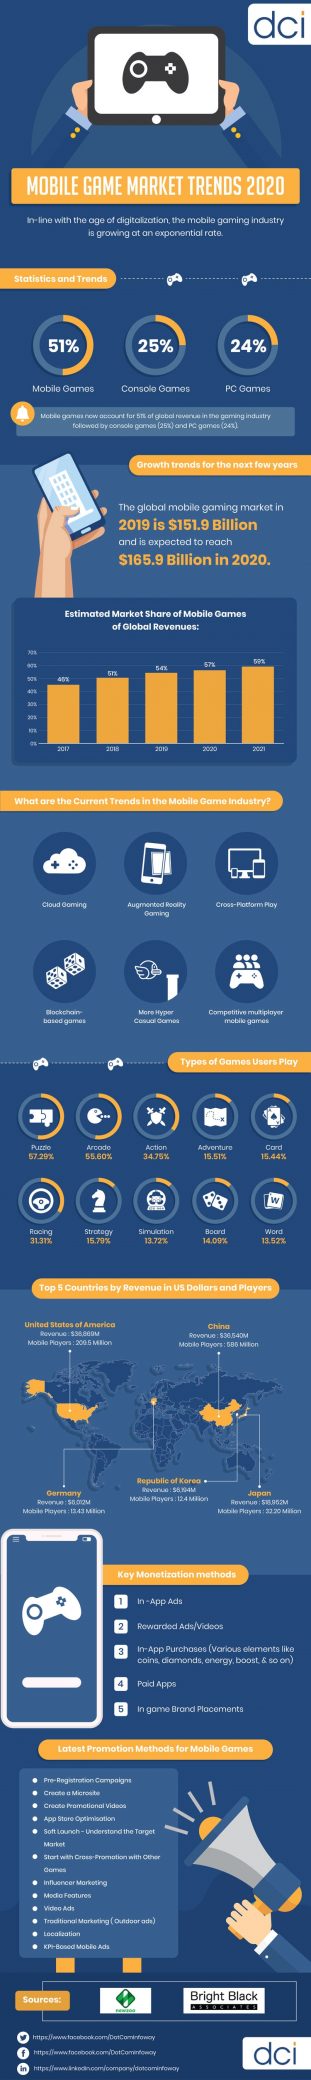 Mobile Game Market Trends 2020 [Infographic]